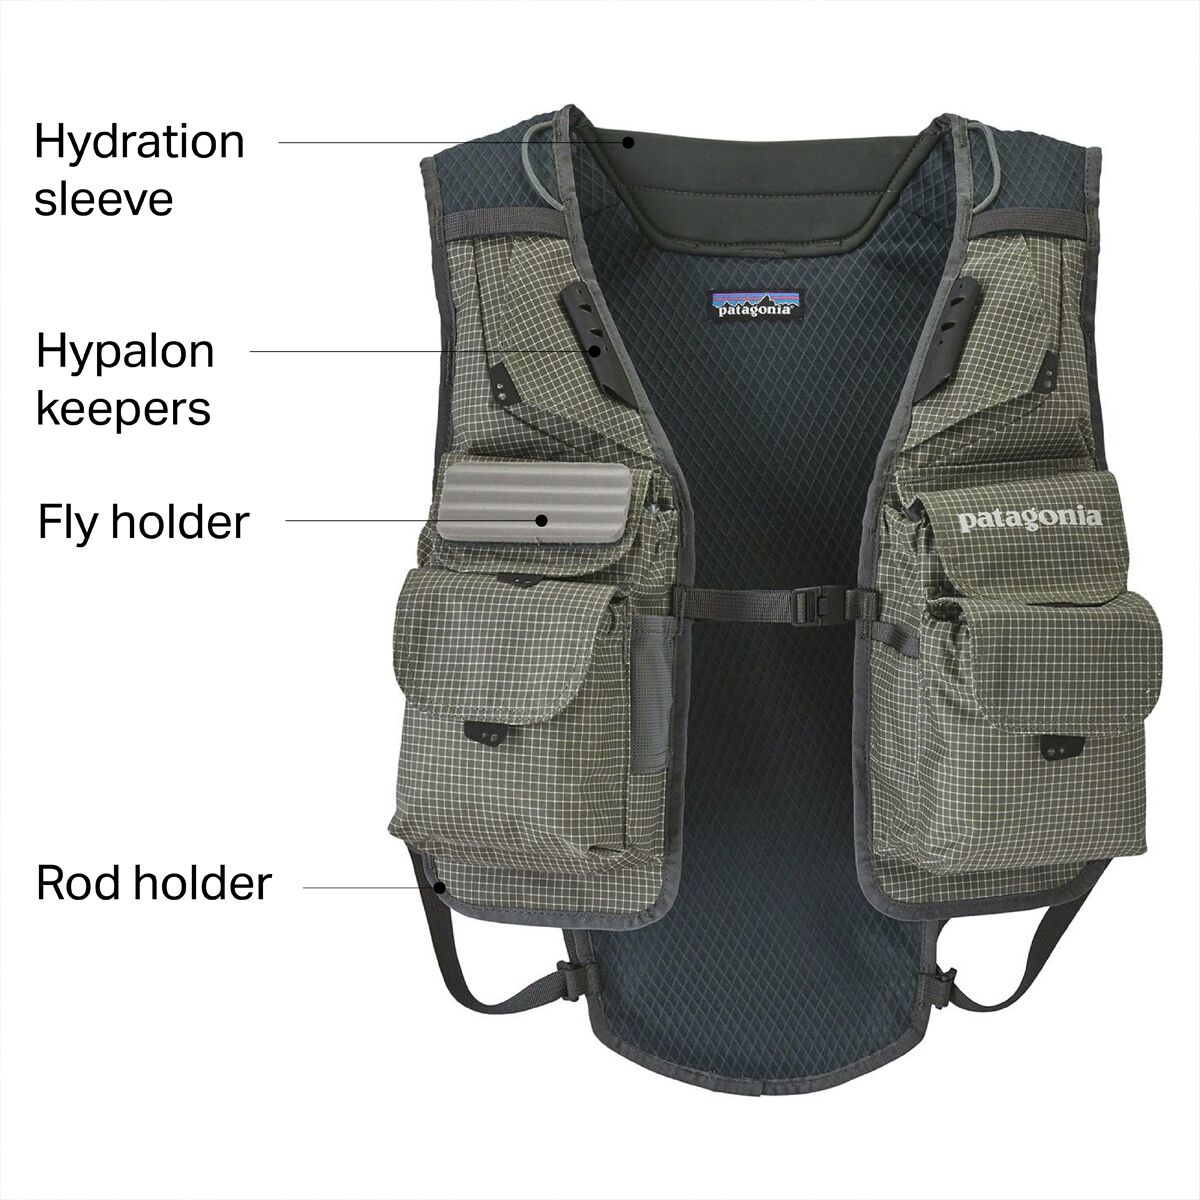 Patagonia Hybrid Fly Fishing Pack Vest - Fly Fishing